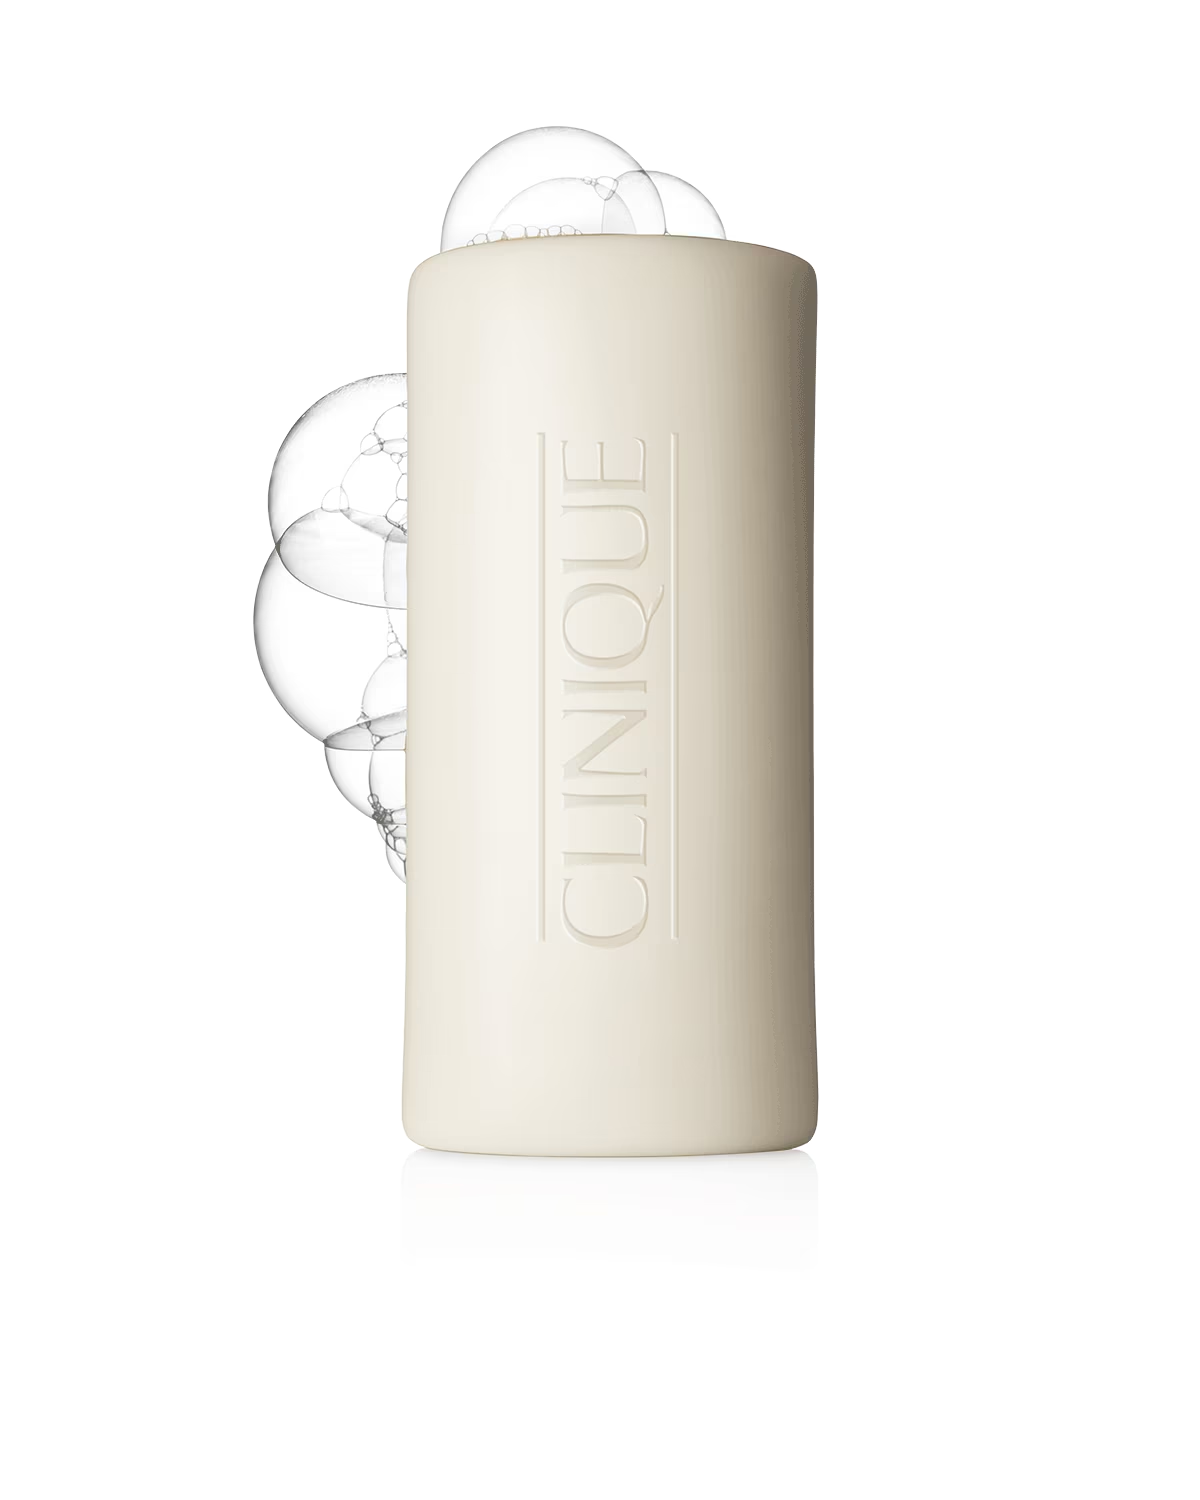 Clinique clean bar face and body